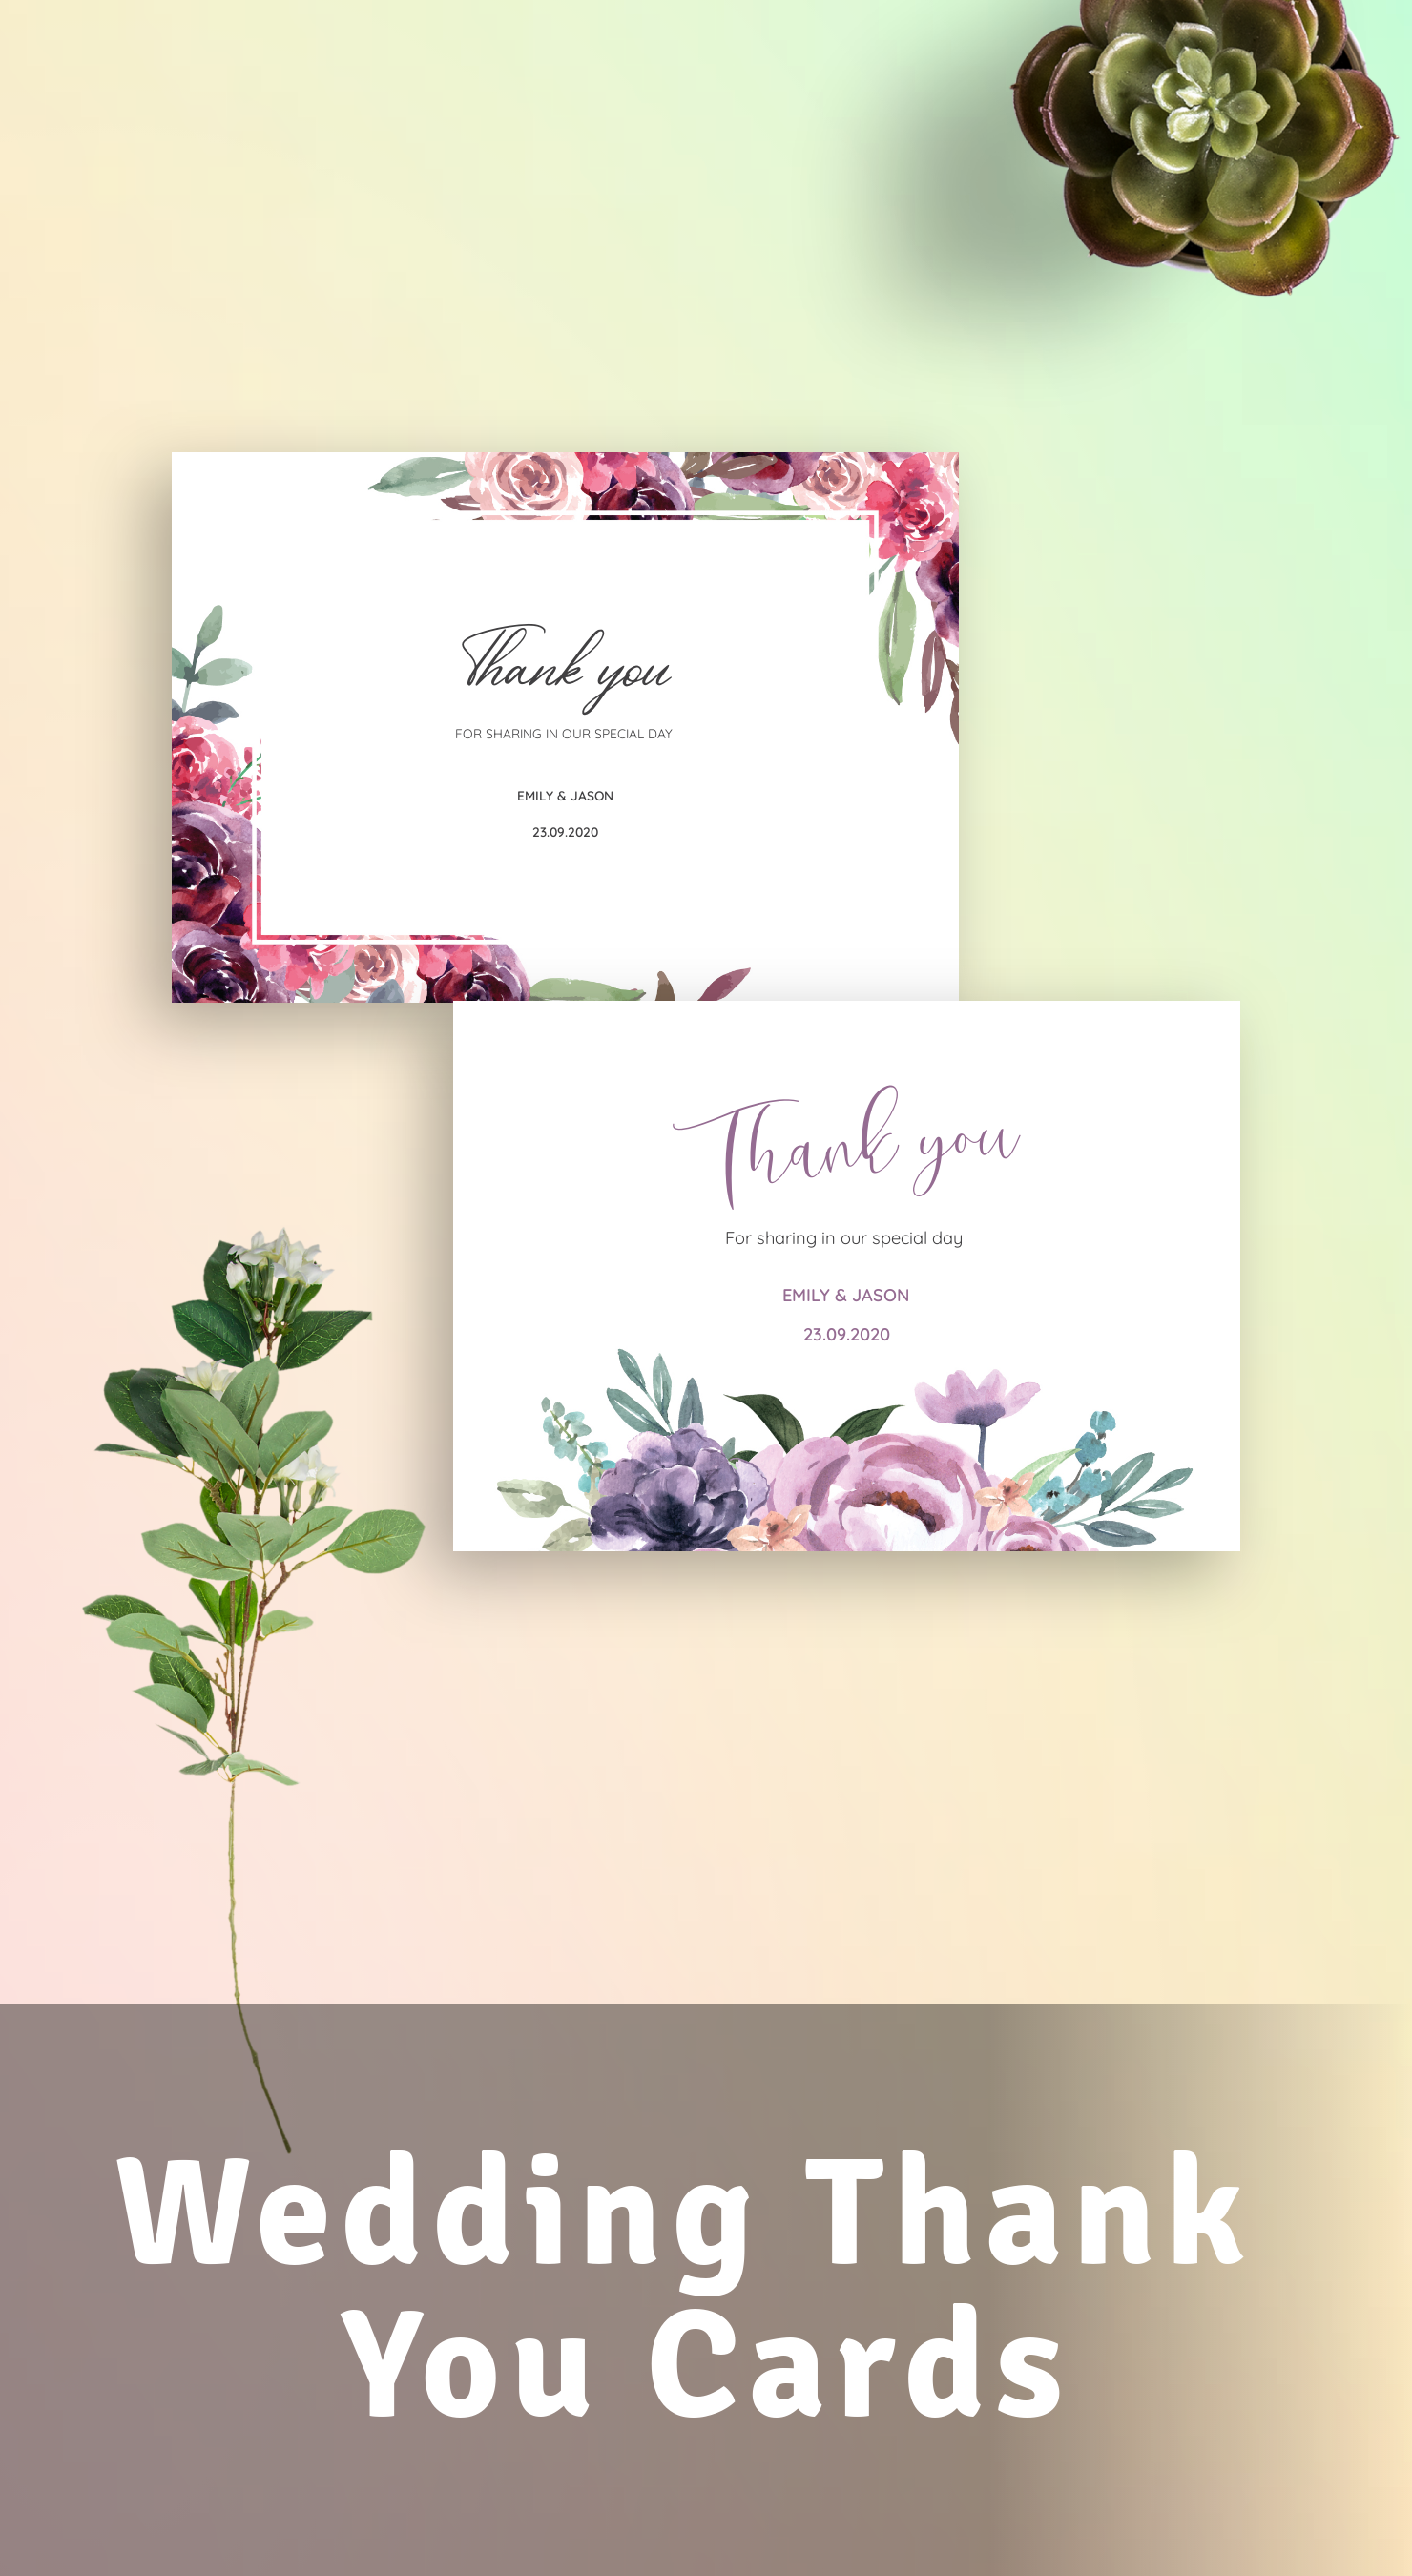 Best Wedding Thank You Cards